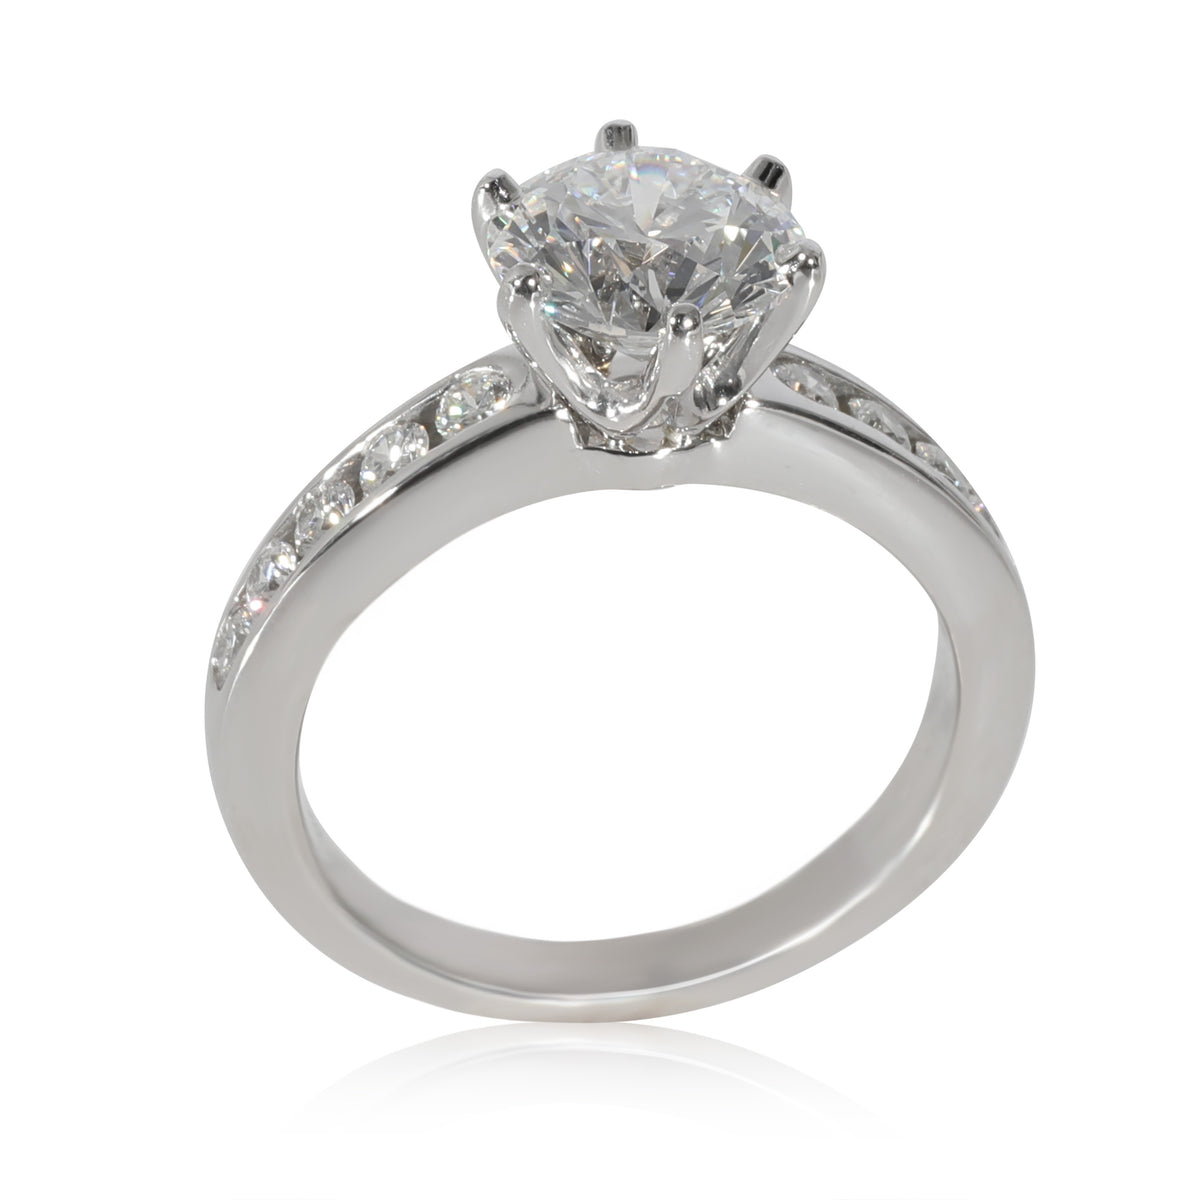 Tiffany & Co. Channel Diamond Engagement Ring in Platinum E VS2 1.88 CTW